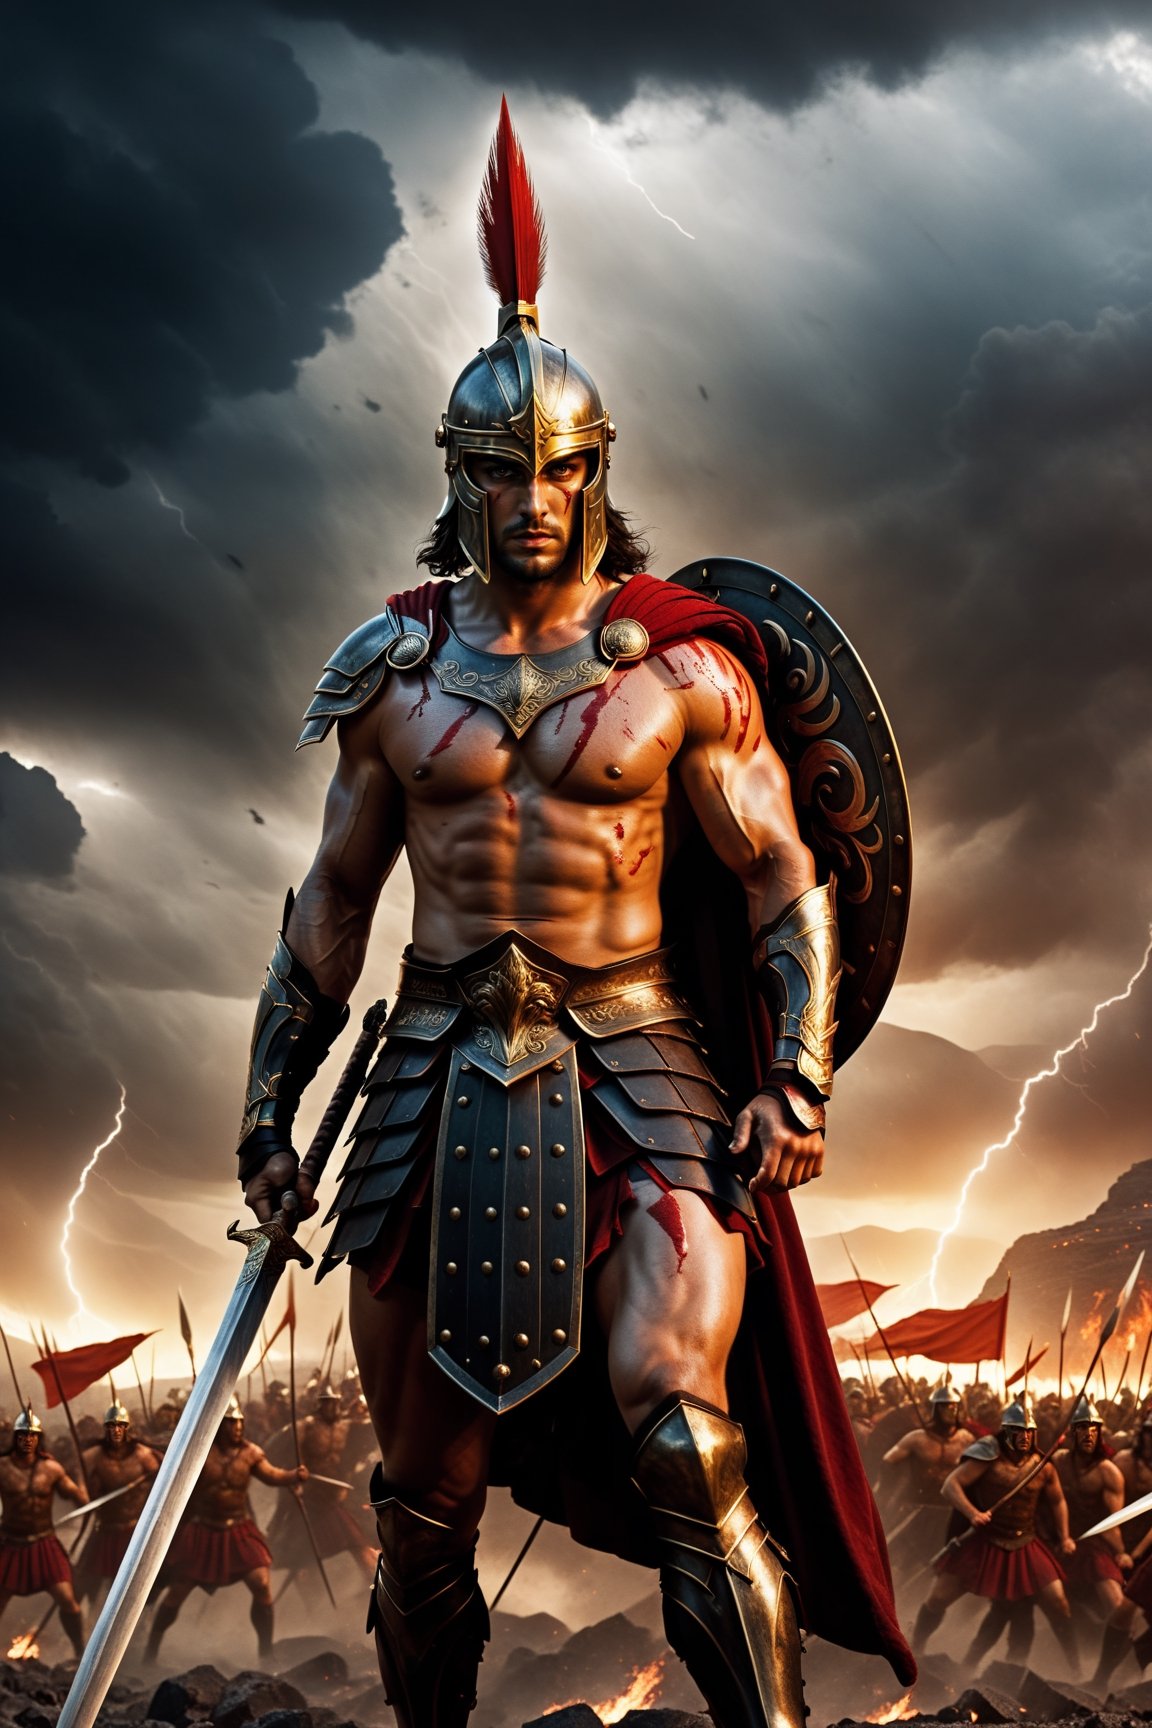 Hell (Inferno) wars, full body,
achilles soldier, The Greek army defeated its enemies with long spears and swords.
Greek soldiers, war with devils, war breaks, diluted with red blood, Greek brave soldiers full of Kasrima atmosphere, ,more detail XL,Movie Still, create photo realistic greek warrior with shield, wearing helmet and warrior outfit, dramatic lighting, high detailed, sharp focus , dramatic mood ,more detail XL,Movie Still,Blood mixed with a long knife and attached to it.,darkart,Lightning, thunder, black clouds, black smoke, charred corpses, golden moon, sunlight, waves, heavy rain, storms, The entire temple city was completely destroyed and captured.,
neoclassicism,side at view,